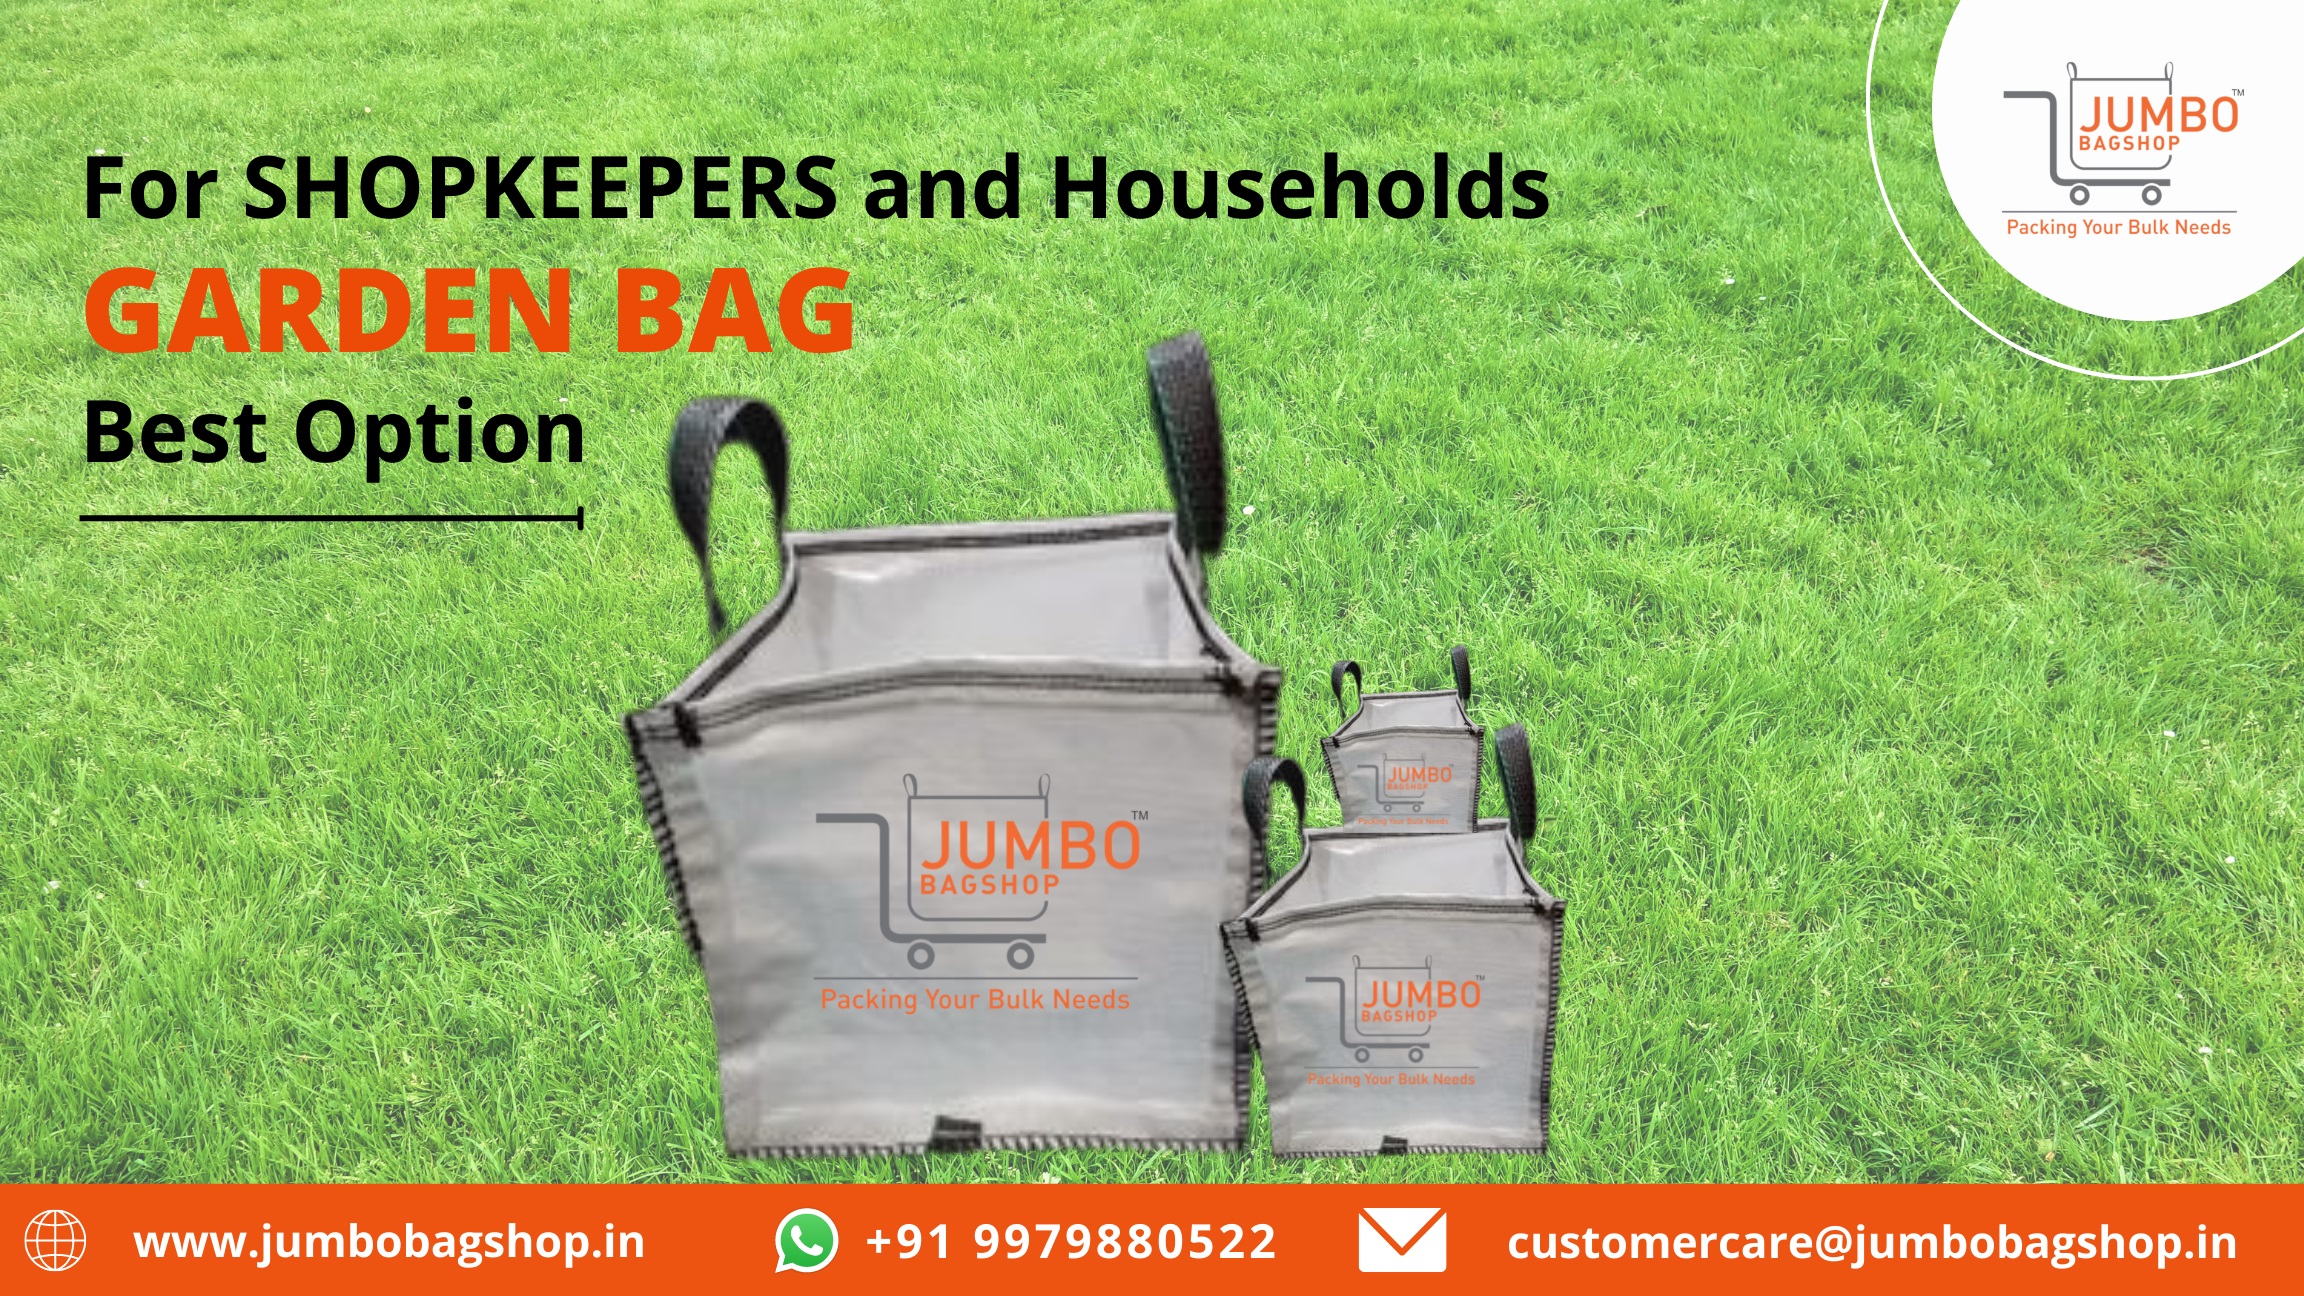 Garden Bag is the Best Option for Shopkeepers and Households